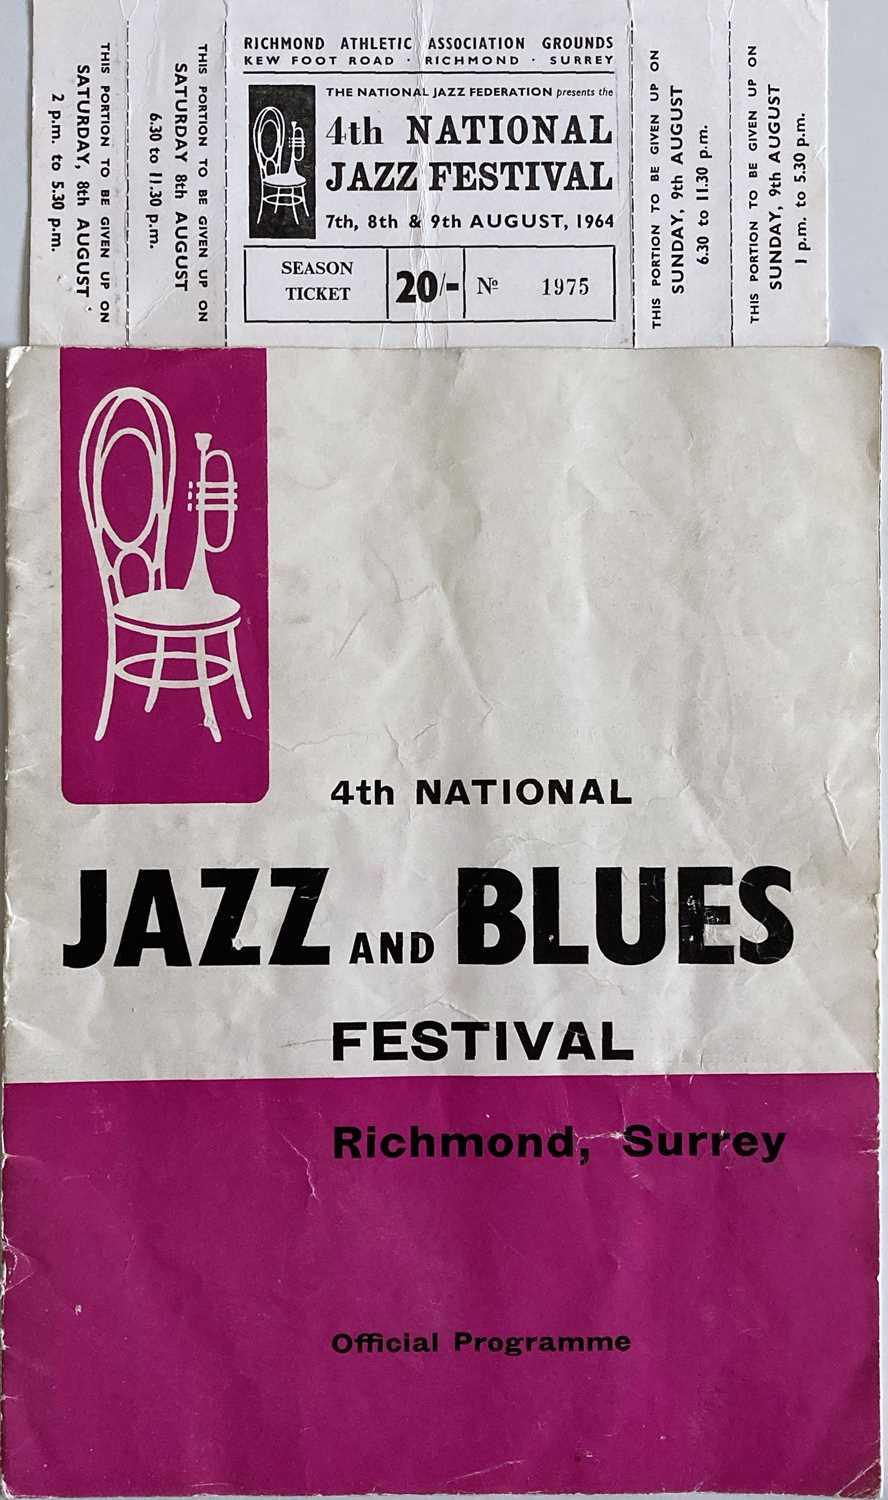 Lot 579 - ROLLING STONES PROGRAMME AND TICKET - JAZZ AND BLUES FESTIVAL.